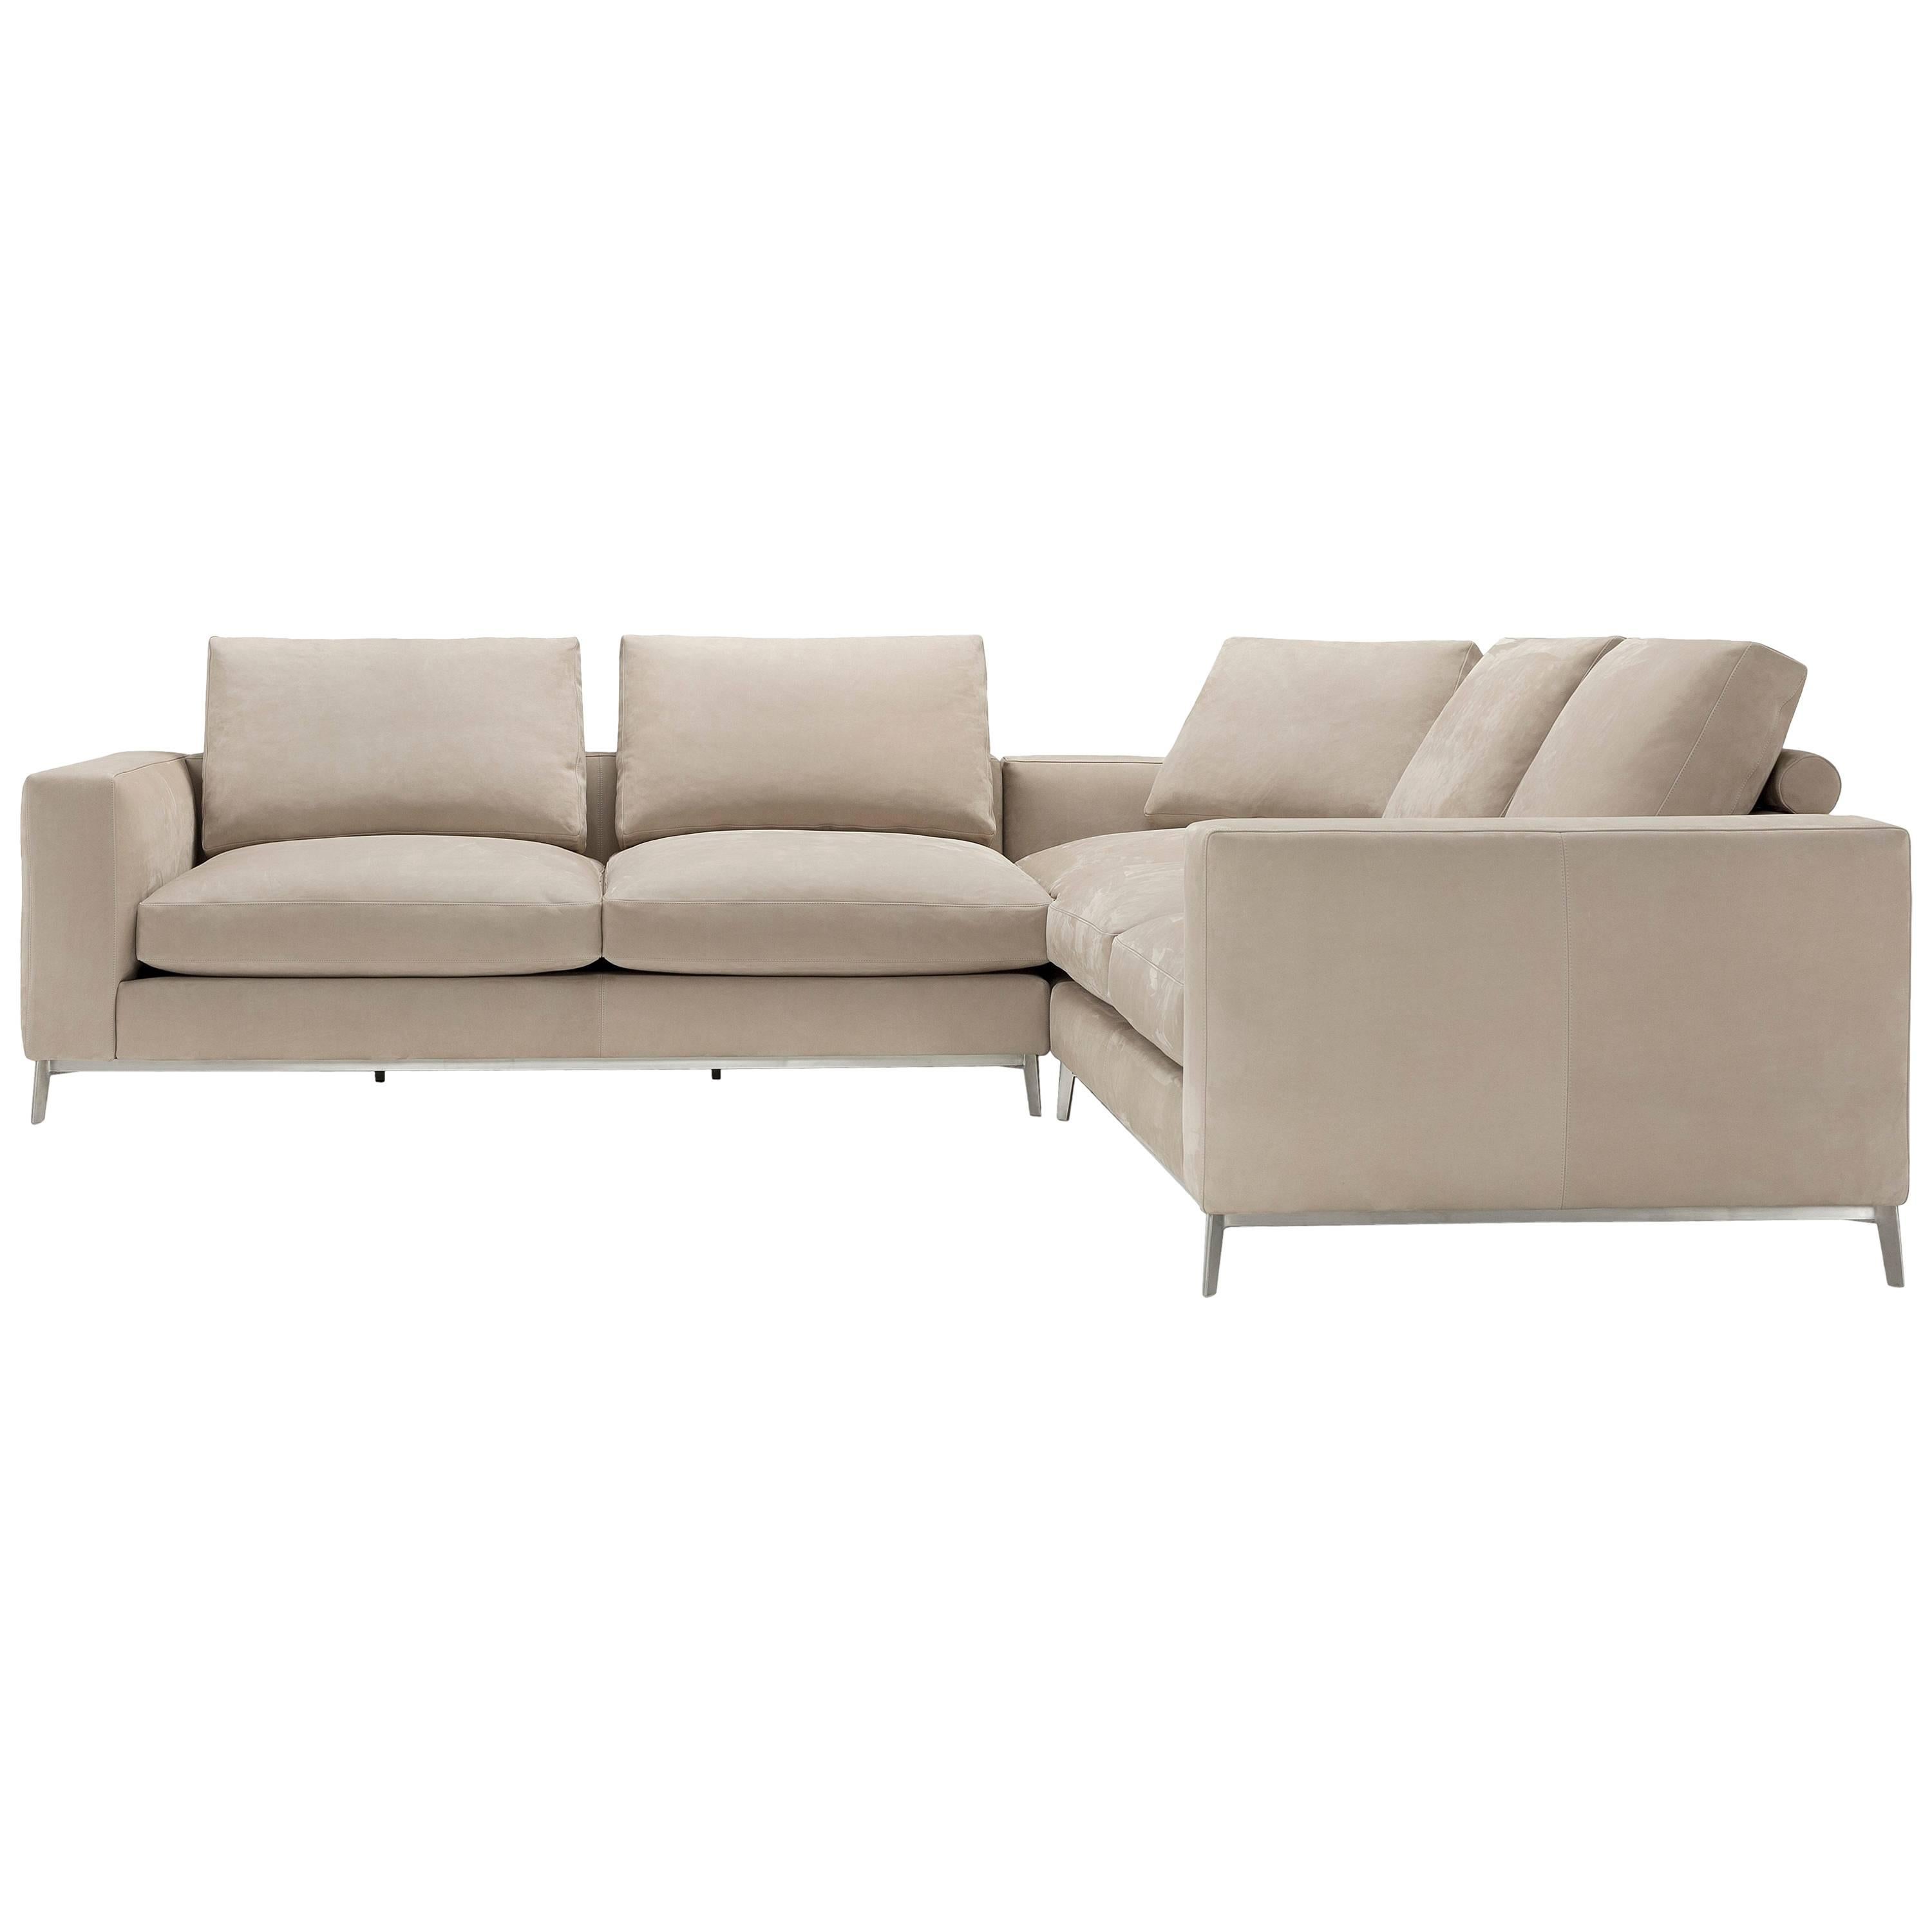 Dorsey Composition Sofa in Beige by Amura Lab For Sale